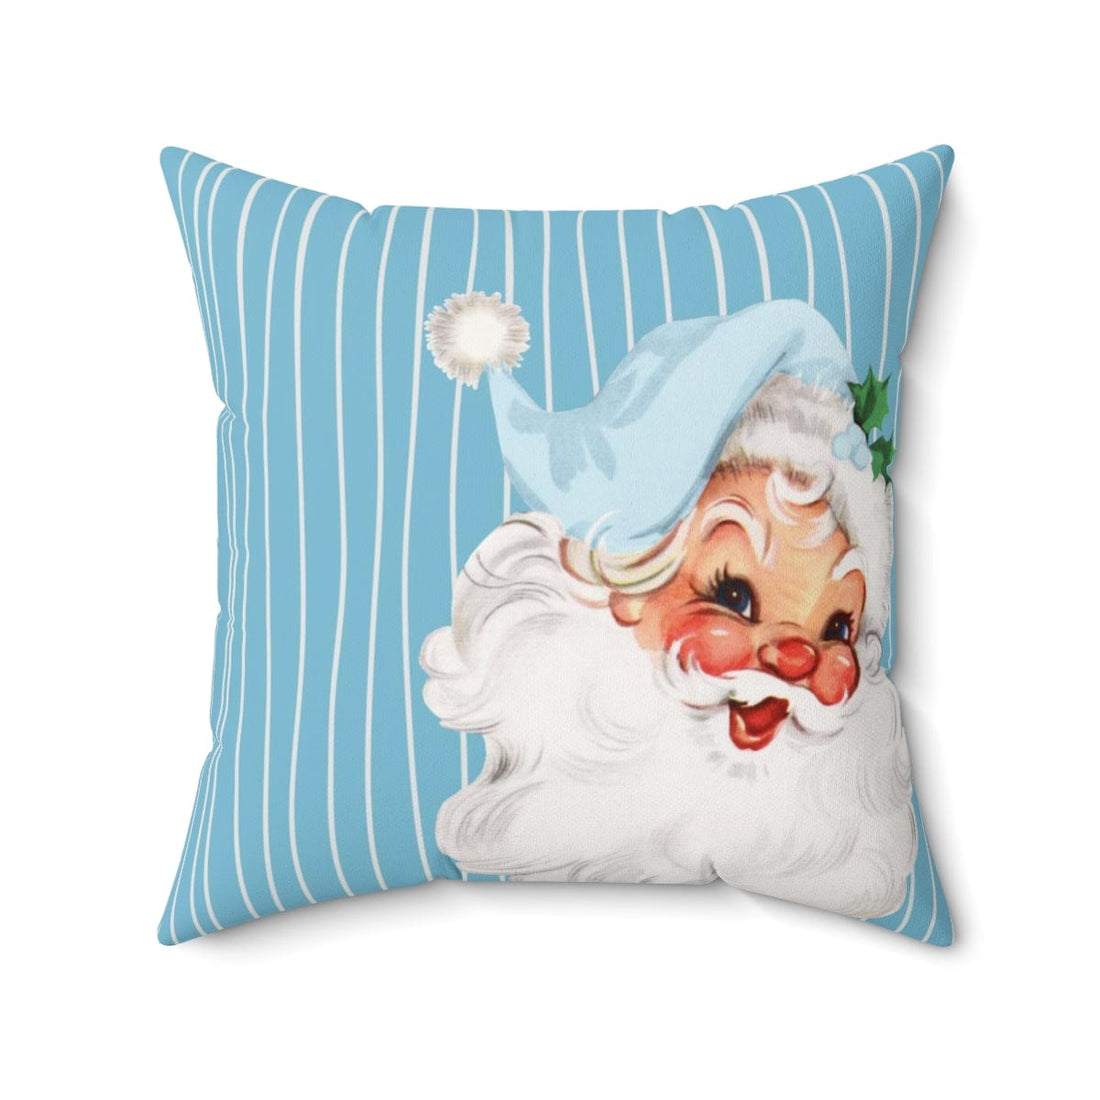 https://cdn.shopify.com/s/files/1/0521/9309/9931/products/20-x-20-vintage-smiling-santa-mid-century-modern-christmas-pillow-cushion-case-only-34970926088347.jpg?v=1669315668&width=1100